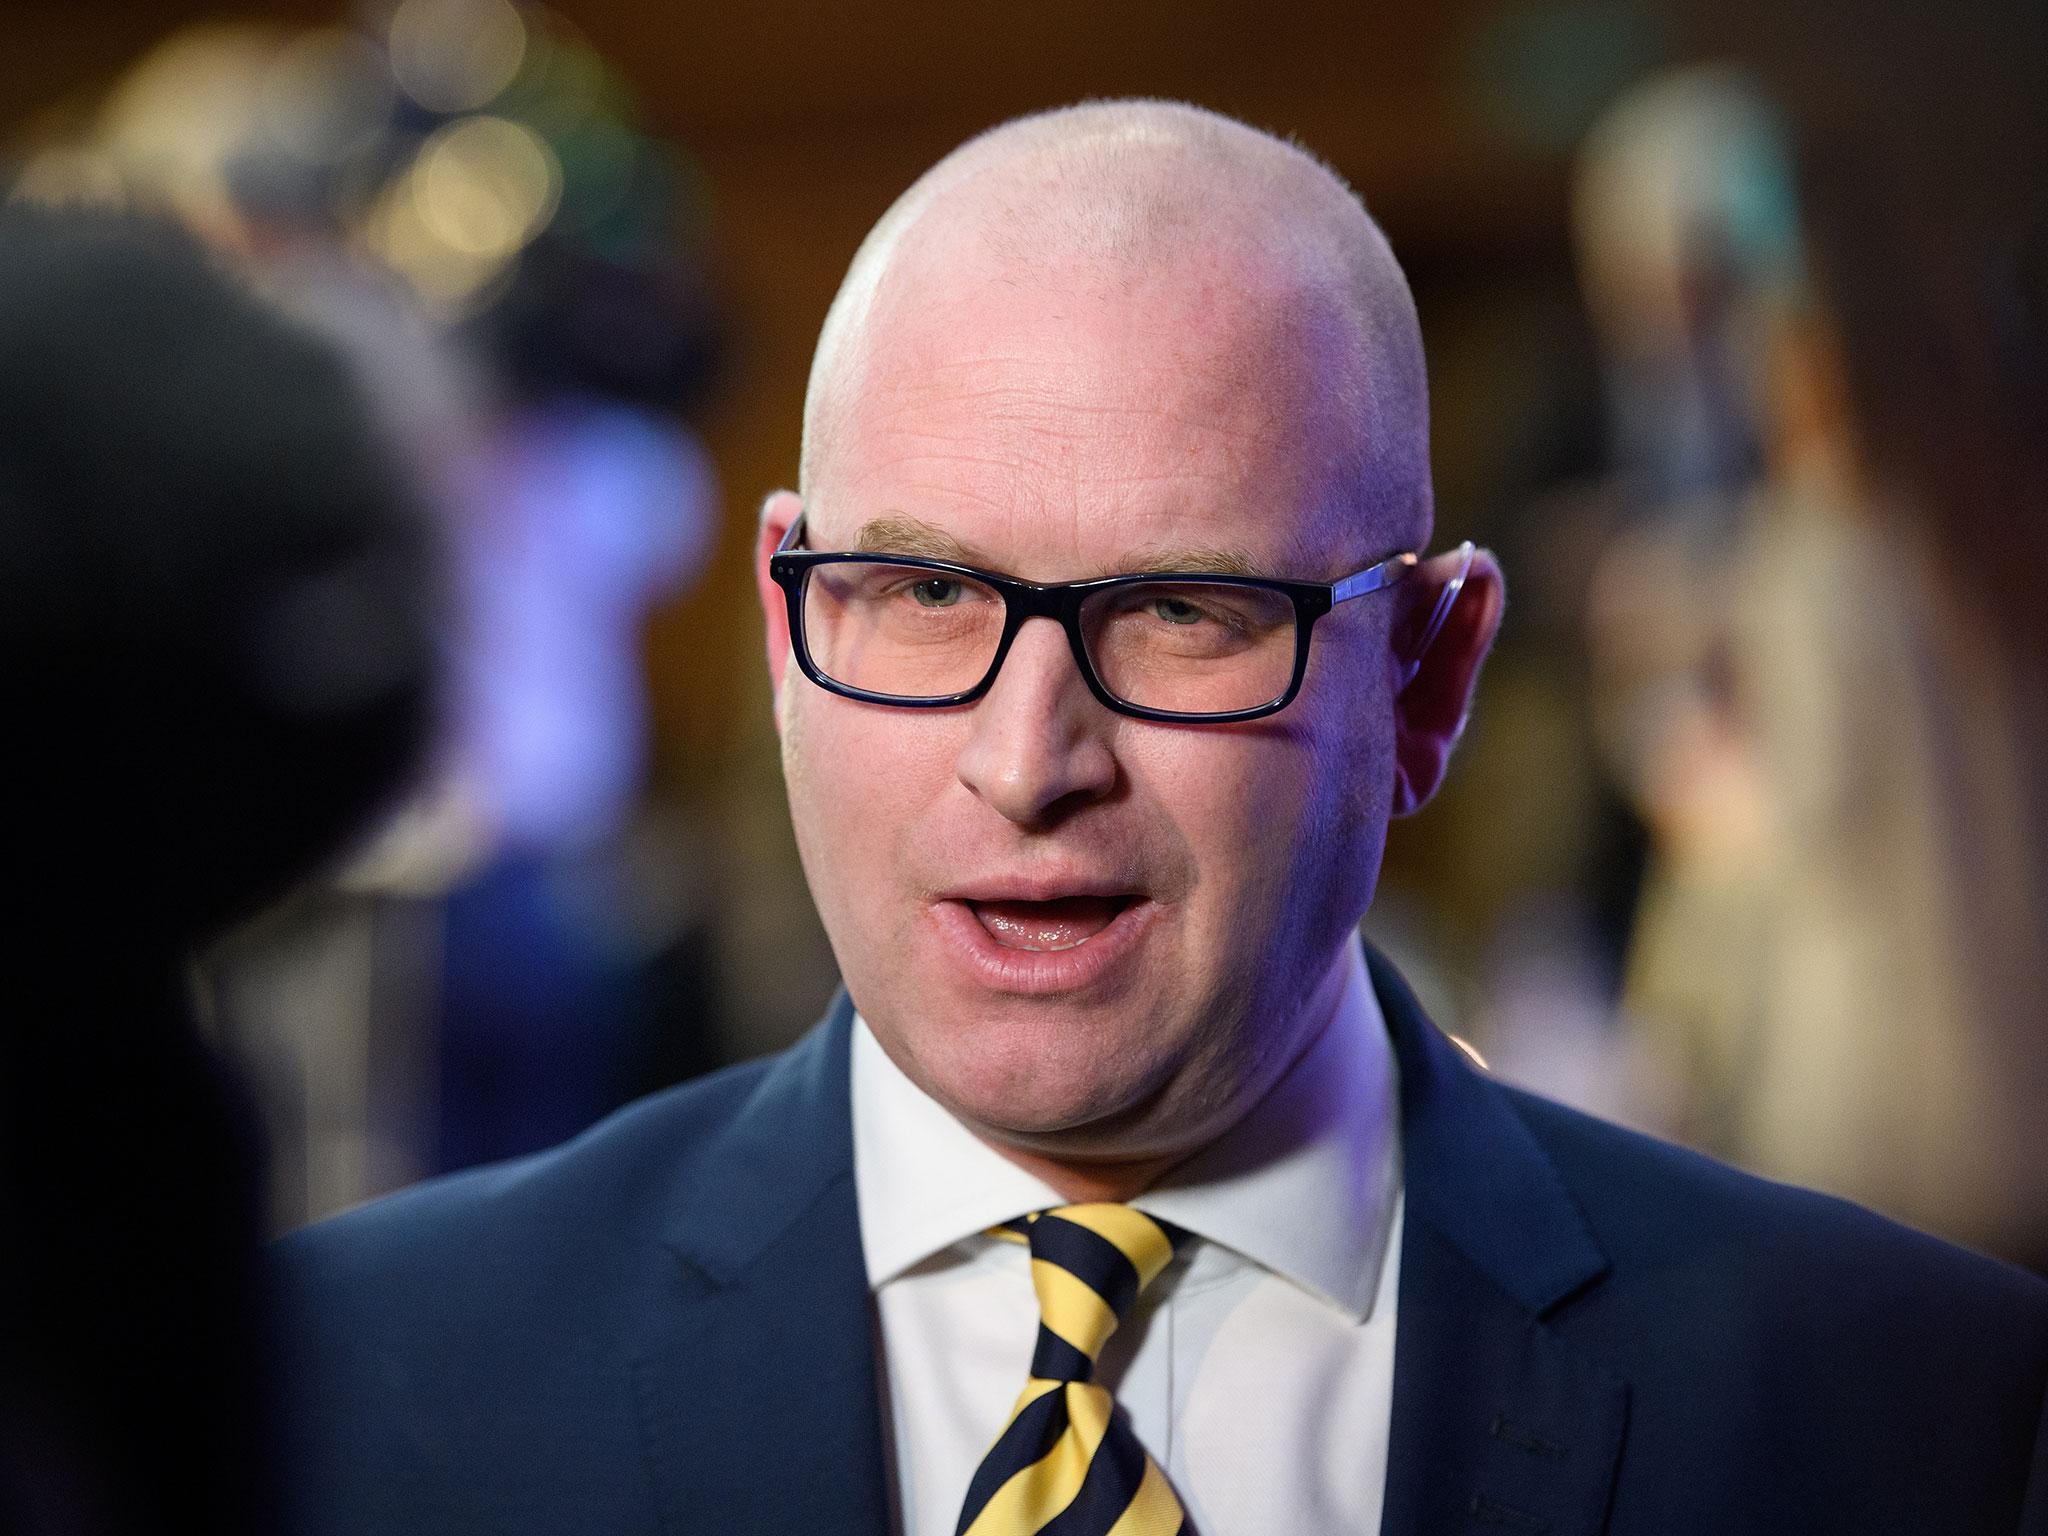 Paul Nuttall said Ukip would no longer be getting involved in other countries’ elections